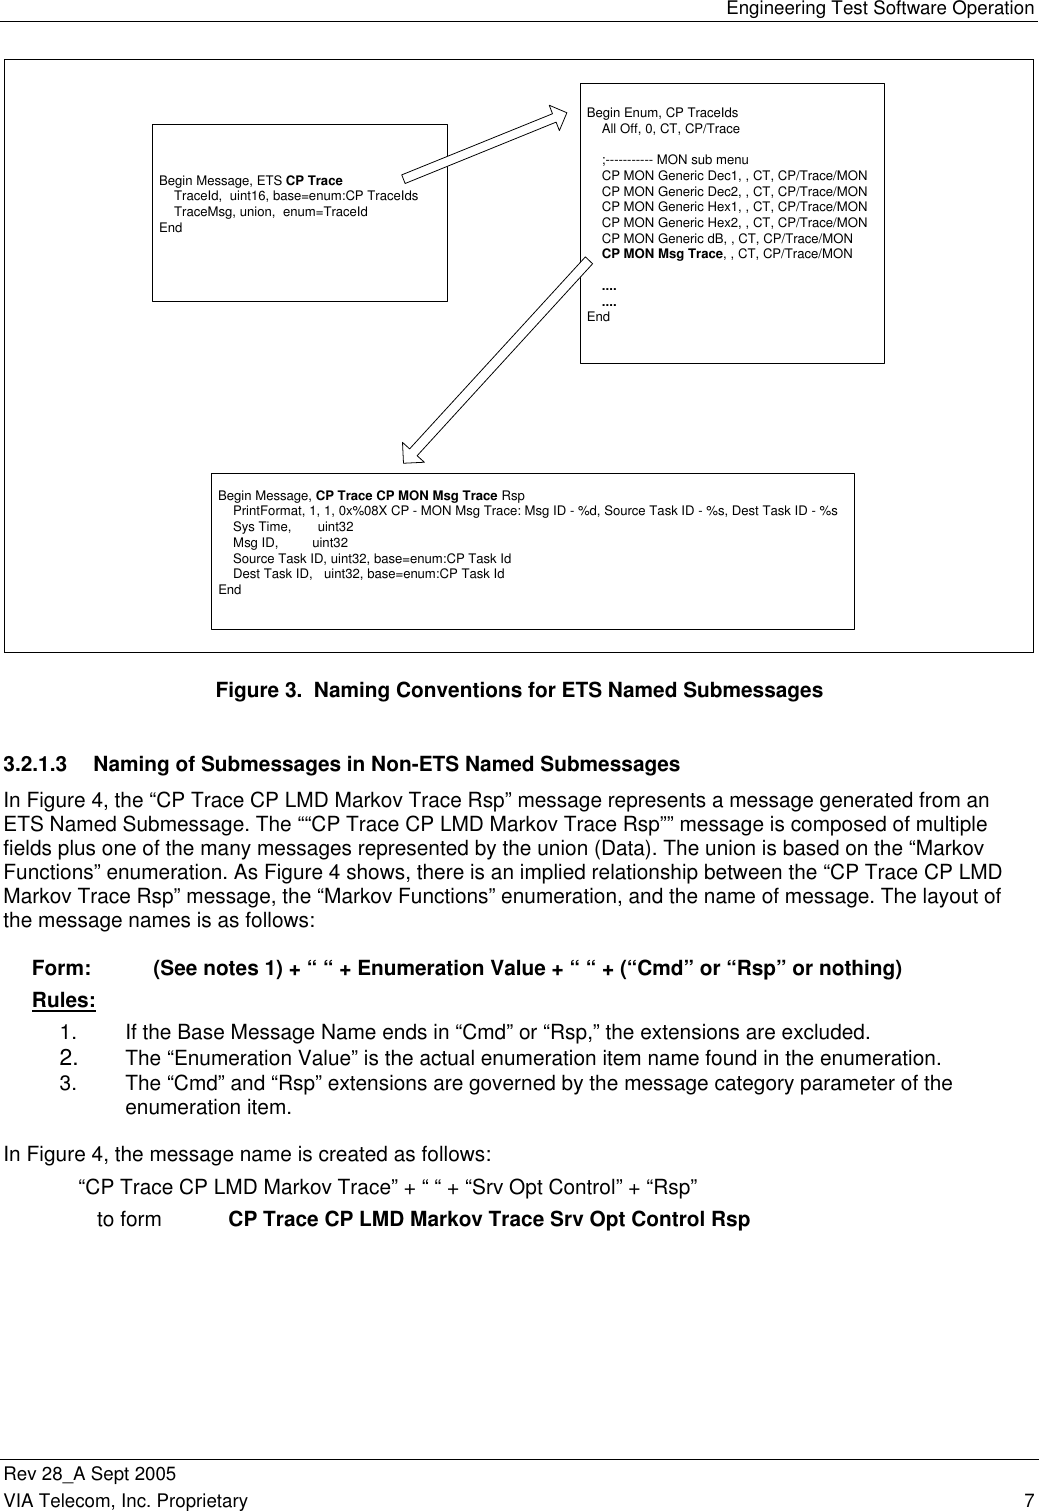   Engineering Test Software Operation Rev 28_A Sept 2005   VIA Telecom, Inc. Proprietary   7  Begin Message, ETS CP Trace    TraceId,  uint16, base=enum:CP TraceIds    TraceMsg, union,  enum=TraceIdEndBegin Enum, CP TraceIds    All Off, 0, CT, CP/Trace    ;----------- MON sub menu    CP MON Generic Dec1, , CT, CP/Trace/MON    CP MON Generic Dec2, , CT, CP/Trace/MON    CP MON Generic Hex1, , CT, CP/Trace/MON    CP MON Generic Hex2, , CT, CP/Trace/MON    CP MON Generic dB, , CT, CP/Trace/MON    CP MON Msg Trace, , CT, CP/Trace/MON    ....    ....End  Begin Message, CP Trace CP MON Msg Trace Rsp    PrintFormat, 1, 1, 0x%08X CP - MON Msg Trace: Msg ID - %d, Source Task ID - %s, Dest Task ID - %s    Sys Time,       uint32    Msg ID,         uint32    Source Task ID, uint32, base=enum:CP Task Id    Dest Task ID,   uint32, base=enum:CP Task IdEnd Figure 3.  Naming Conventions for ETS Named Submessages 3.2.1.3  Naming of Submessages in Non-ETS Named Submessages In Figure 4, the “CP Trace CP LMD Markov Trace Rsp” message represents a message generated from an ETS Named Submessage. The ““CP Trace CP LMD Markov Trace Rsp”” message is composed of multiple fields plus one of the many messages represented by the union (Data). The union is based on the “Markov Functions” enumeration. As Figure 4 shows, there is an implied relationship between the “CP Trace CP LMD Markov Trace Rsp” message, the “Markov Functions” enumeration, and the name of message. The layout of the message names is as follows:  Form:  (See notes 1) + “ “ + Enumeration Value + “ “ + (“Cmd” or “Rsp” or nothing) Rules: 1.  If the Base Message Name ends in “Cmd” or “Rsp,” the extensions are excluded.  2. The “Enumeration Value” is the actual enumeration item name found in the enumeration. 3.  The “Cmd” and “Rsp” extensions are governed by the message category parameter of the enumeration item.  In Figure 4, the message name is created as follows:   “CP Trace CP LMD Markov Trace” + “ “ + “Srv Opt Control” + “Rsp”     to form   CP Trace CP LMD Markov Trace Srv Opt Control Rsp   